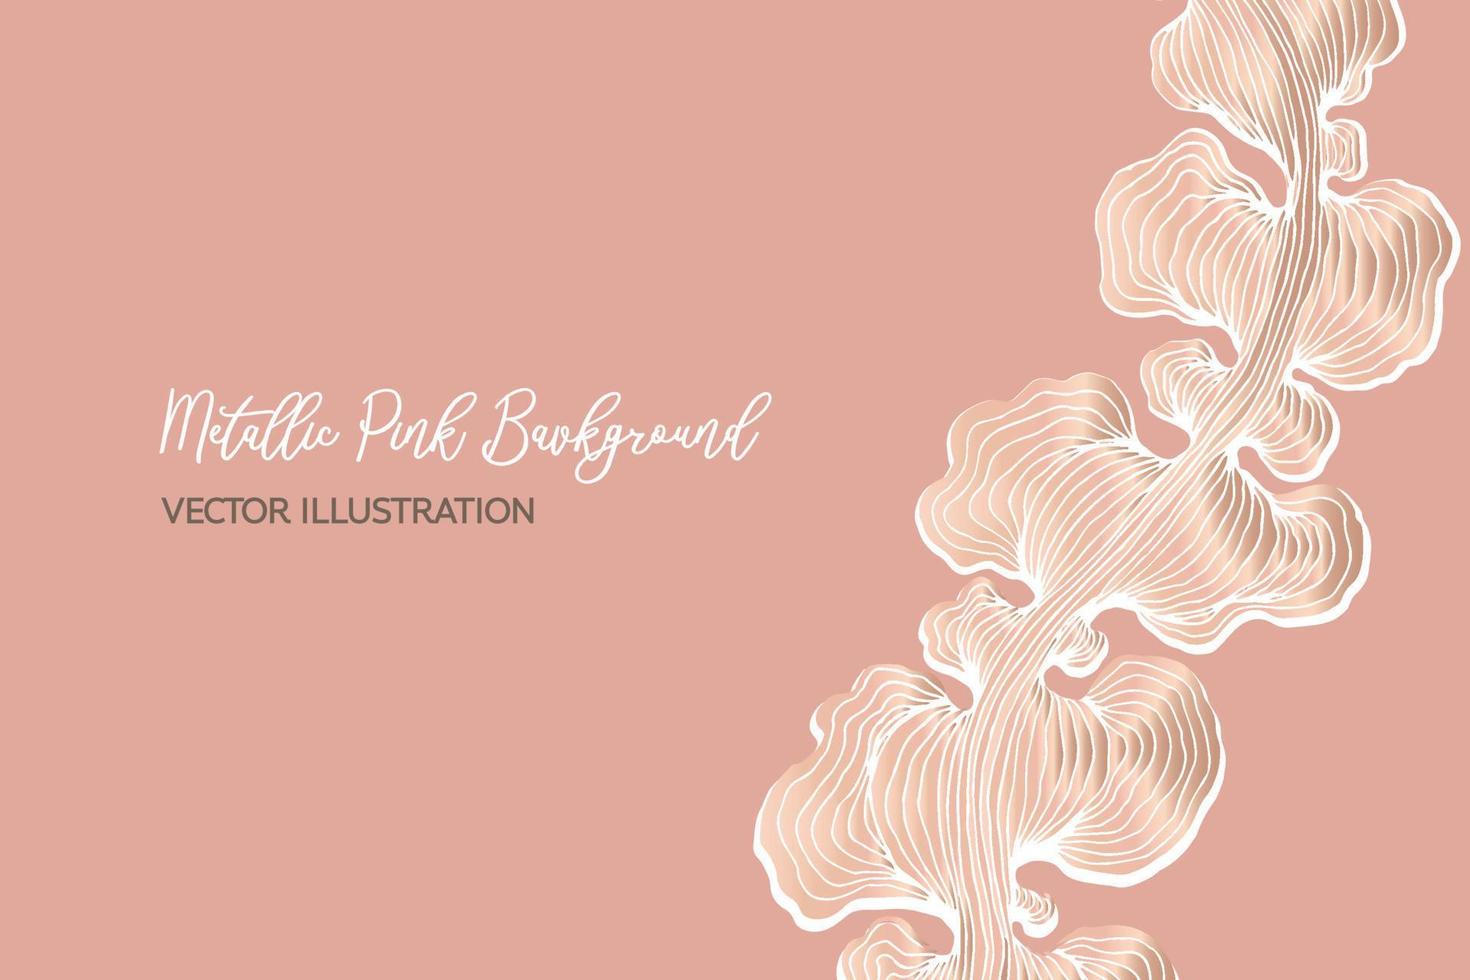 Gold metallic pink ethereal swirly abstract, organic lines on vintage pink background. vector